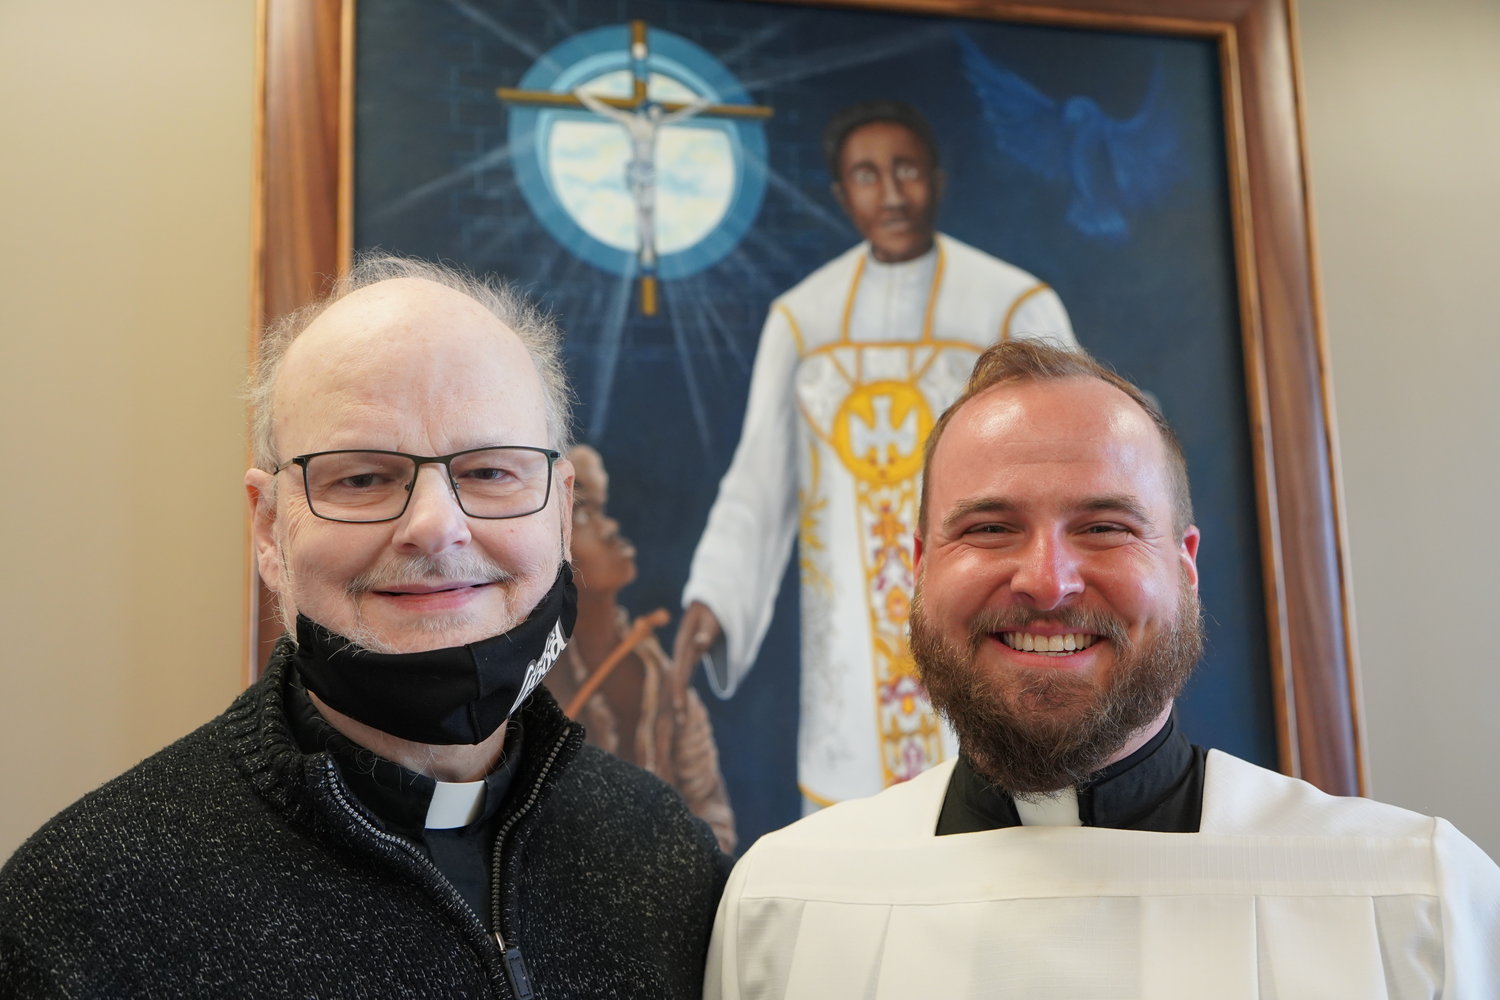 Father Mike Coleman and Father Paul Clark, chaplains at Fr. Tolton Regional Catholic High School, stand near the newly unveiled artwork, "The Light that Guides the Faithful."